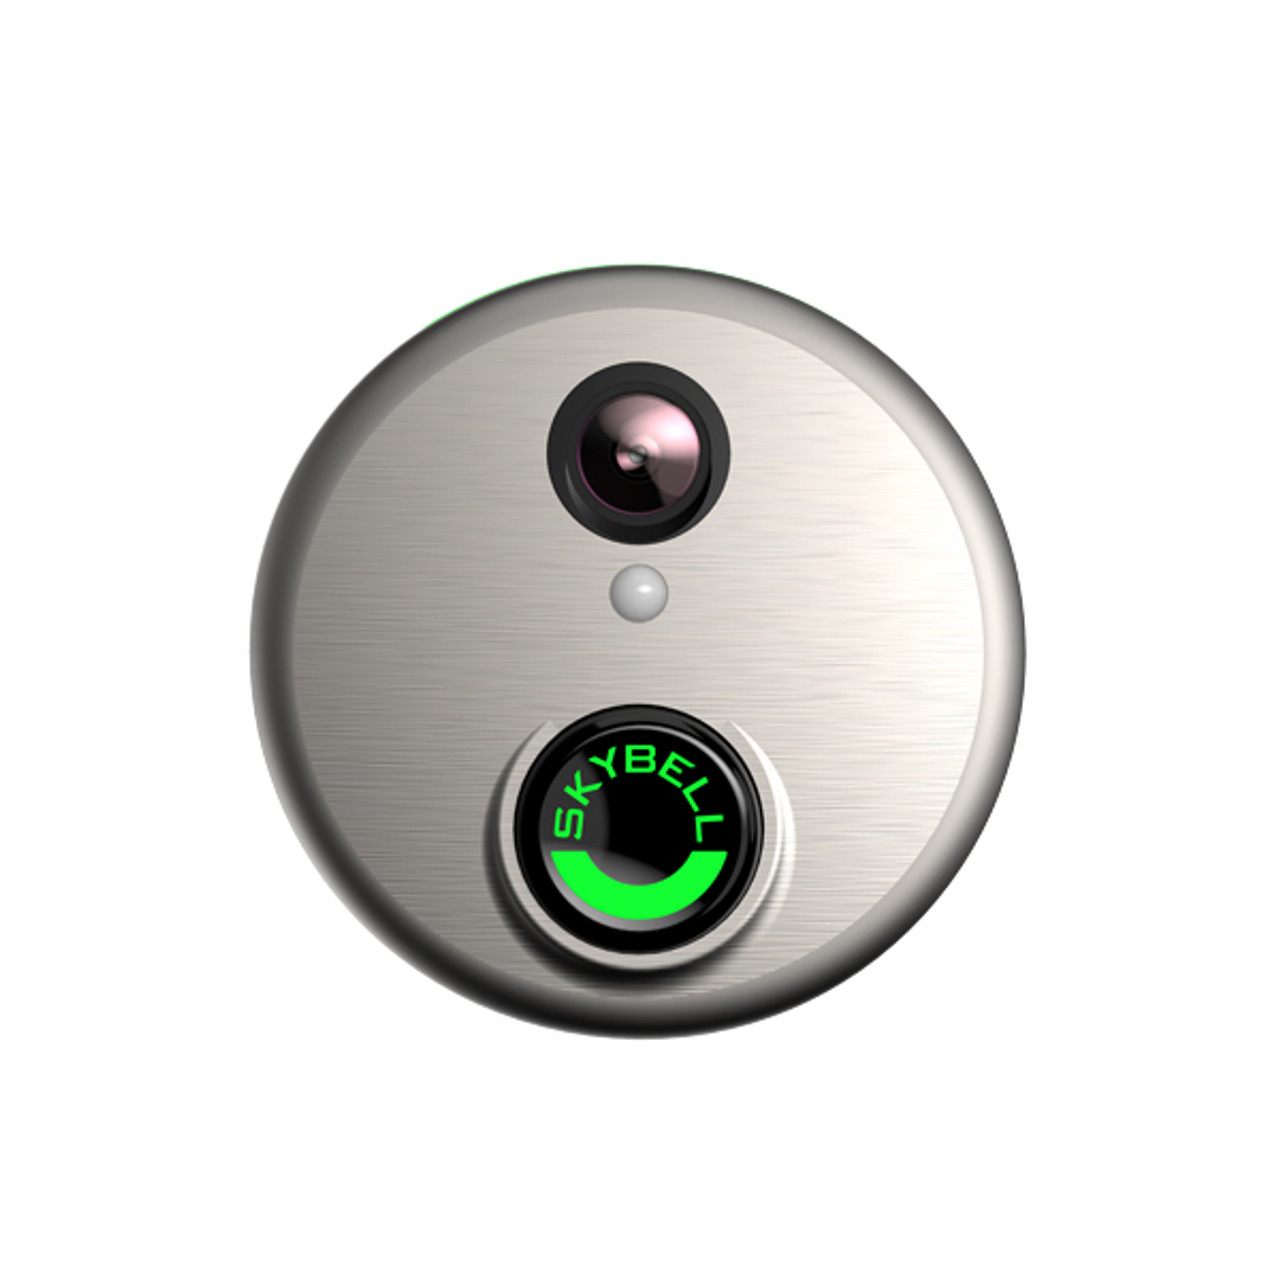 How To Add SkyBell Video Doorbell To Alarm.com Account